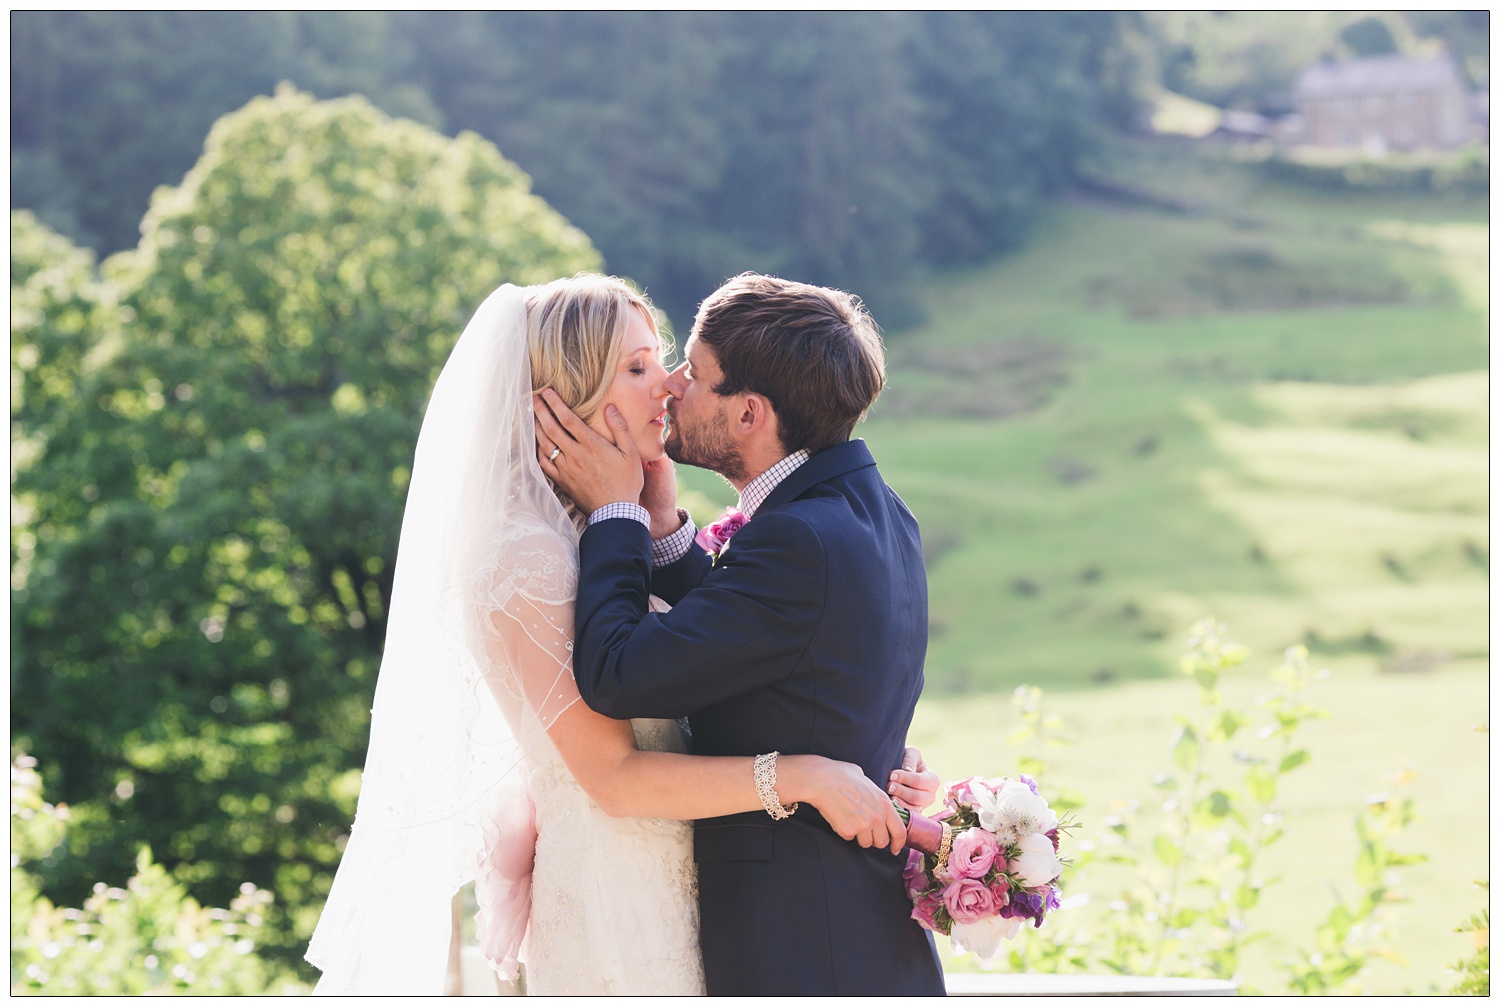 The groom holds his new wife's face before kissing her. She is wearing a veil. They are outside the Inn at Whitewell with the countryside behind them.